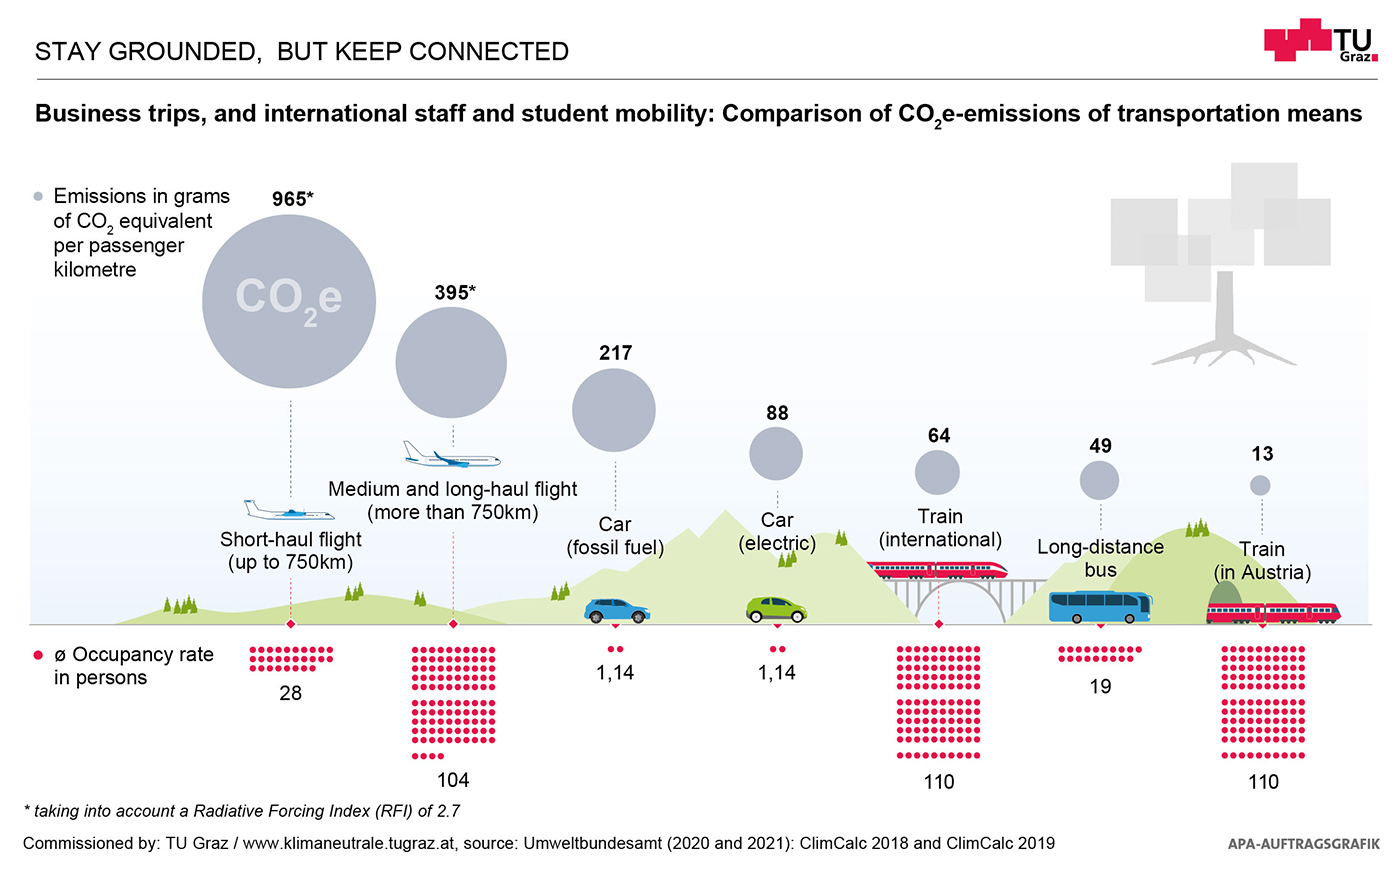 Graphical representation of the CO2 emissions of different means of transport during business trips.